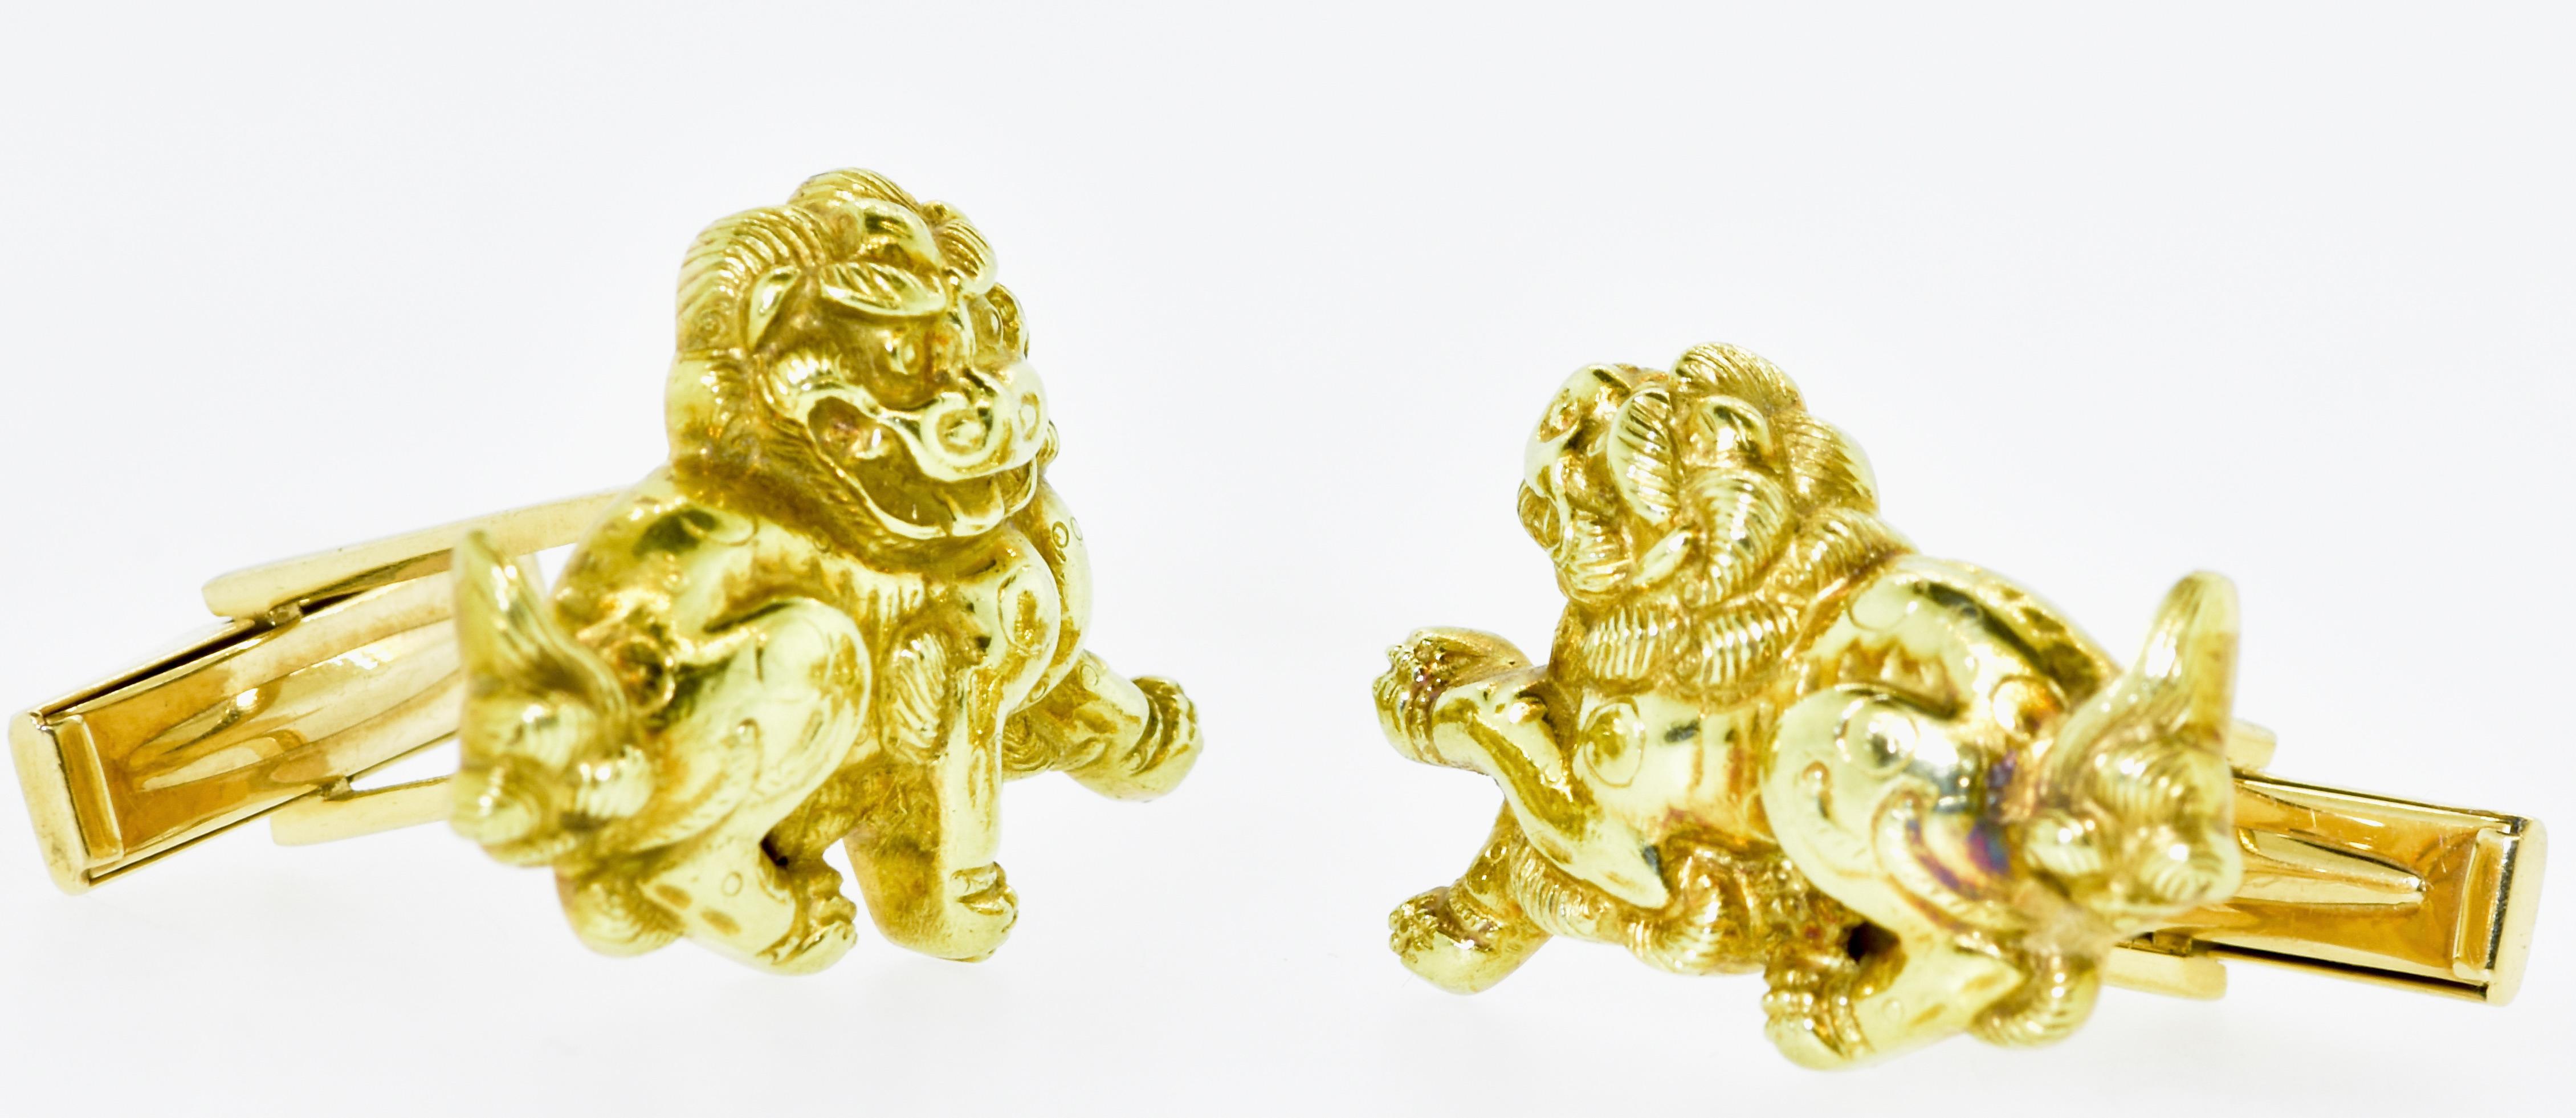 18K cufflinks of foo dogs (guardian lions) displaying  wonderful detail.   The gold finely carved foo dogs were made, at a later time into these cufflinks probably  mid-20th century.  They no doubt came from another a larger object from the 19th